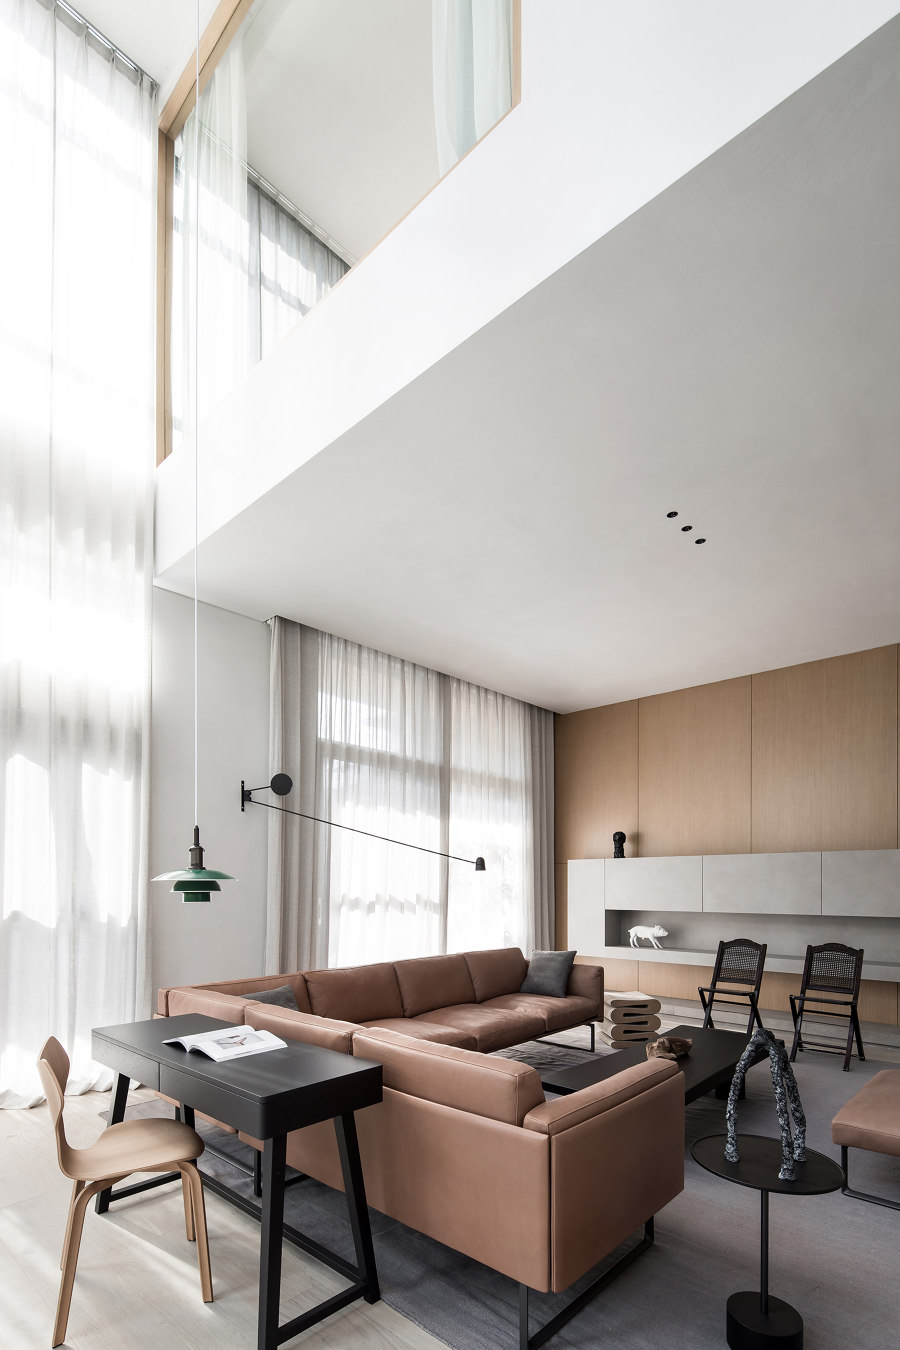 A Desired Home by Liang Architecture Studio | Living space